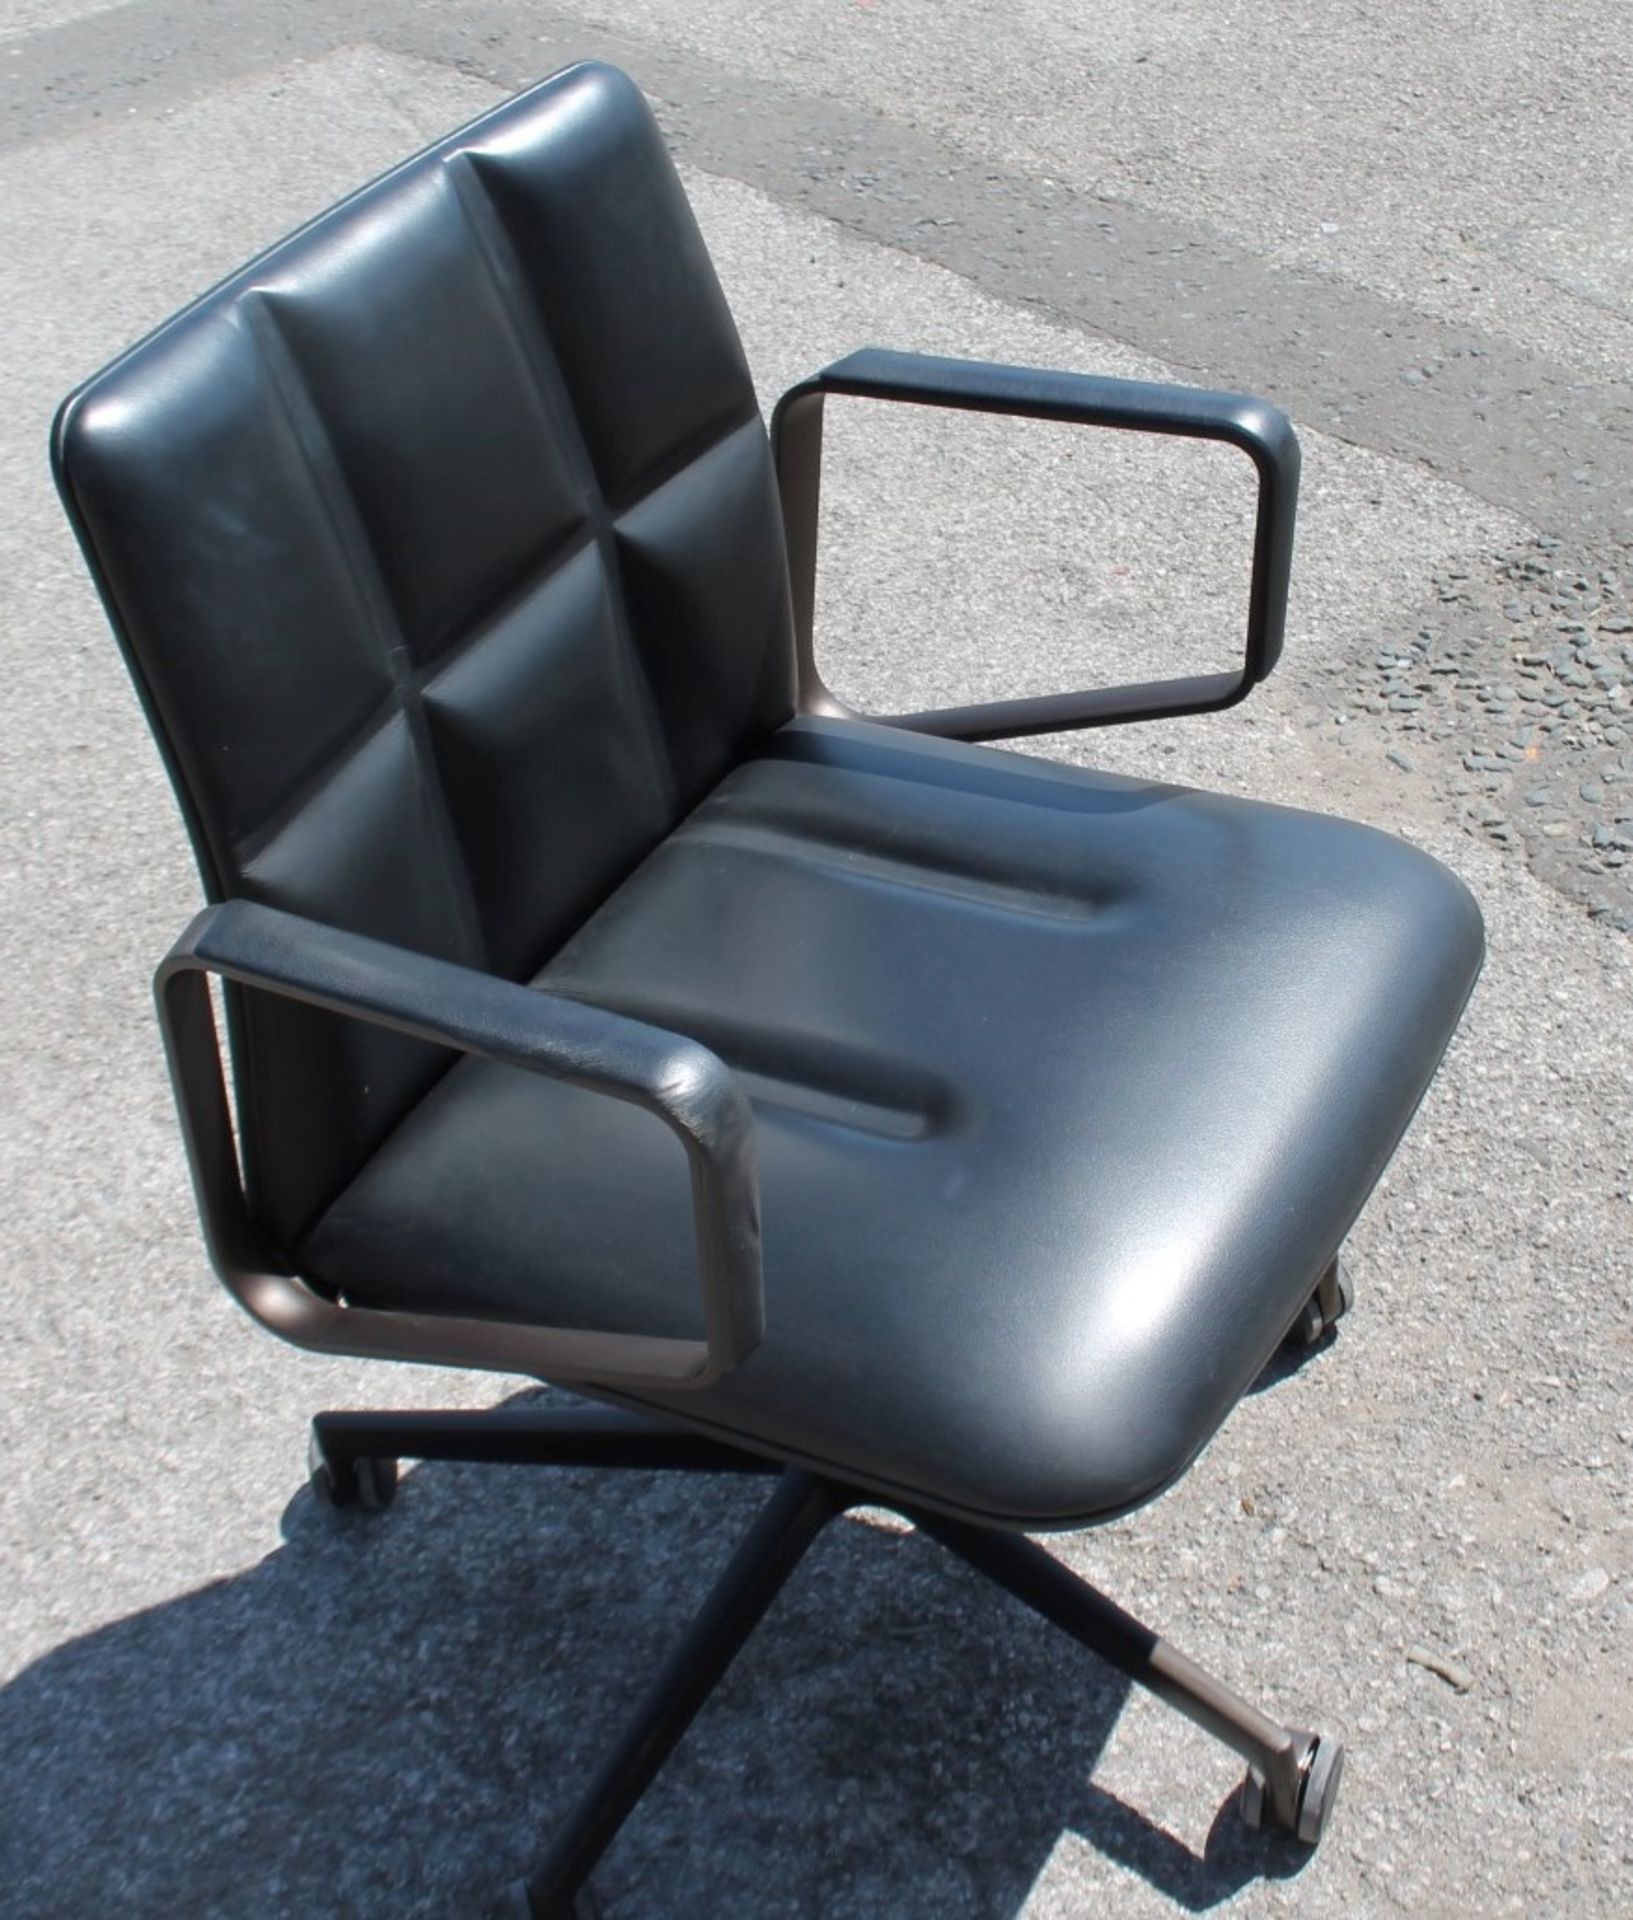 1 x WALTER KNOLL 'Leadchair' Executive Meeting Chair In Genuine Leather - Original RRP £4,250 - Image 7 of 9